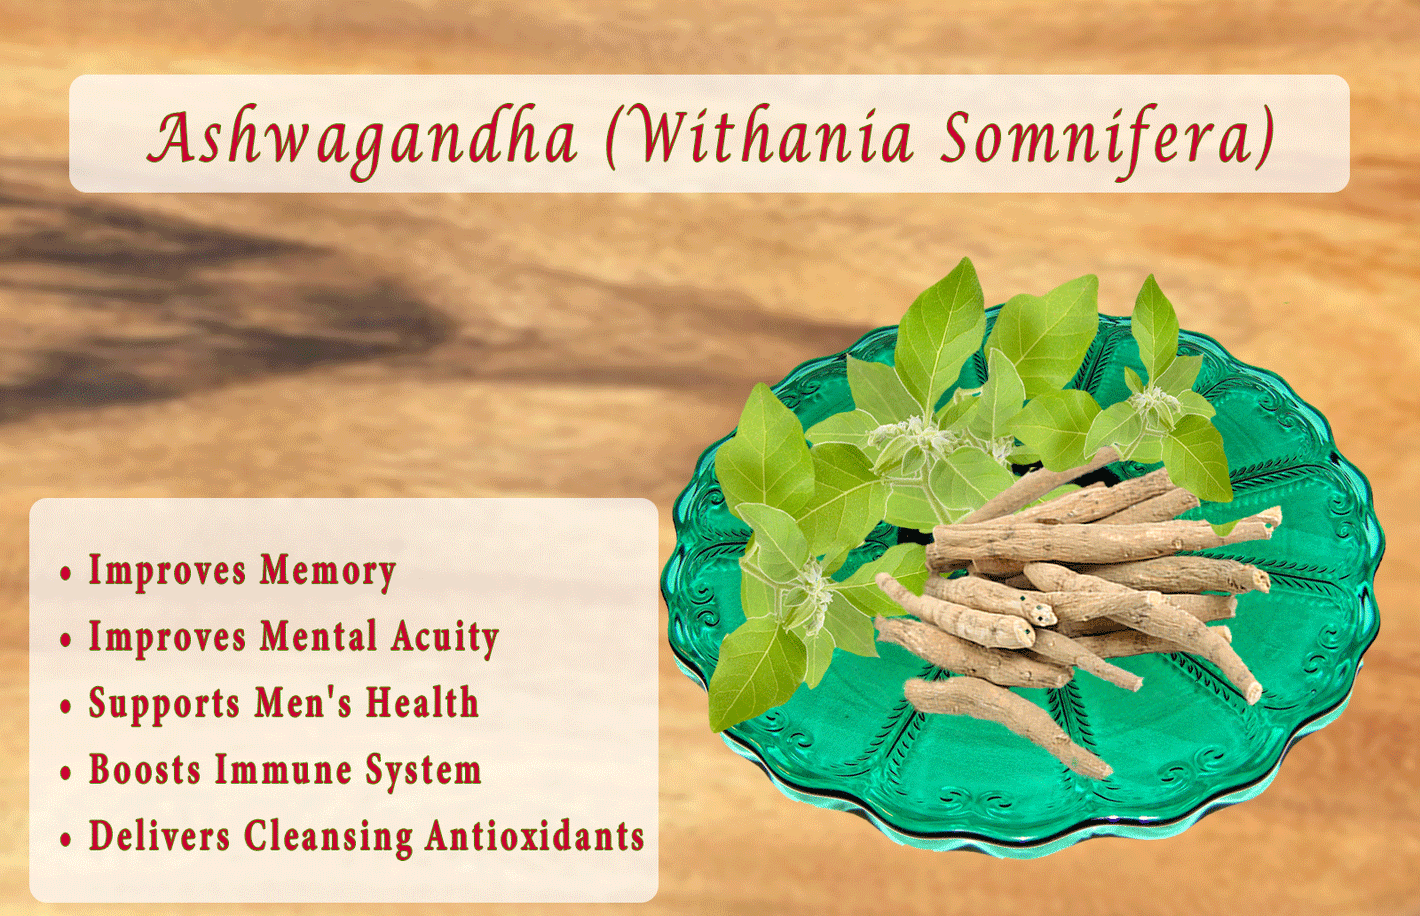 Ashwagandha (Withania Somnifera) •	Improves Memory •	Improves Mental Acuity •	Supports Men's Health •	Boosts Immune System •	Delivers Cleansing Antioxidants